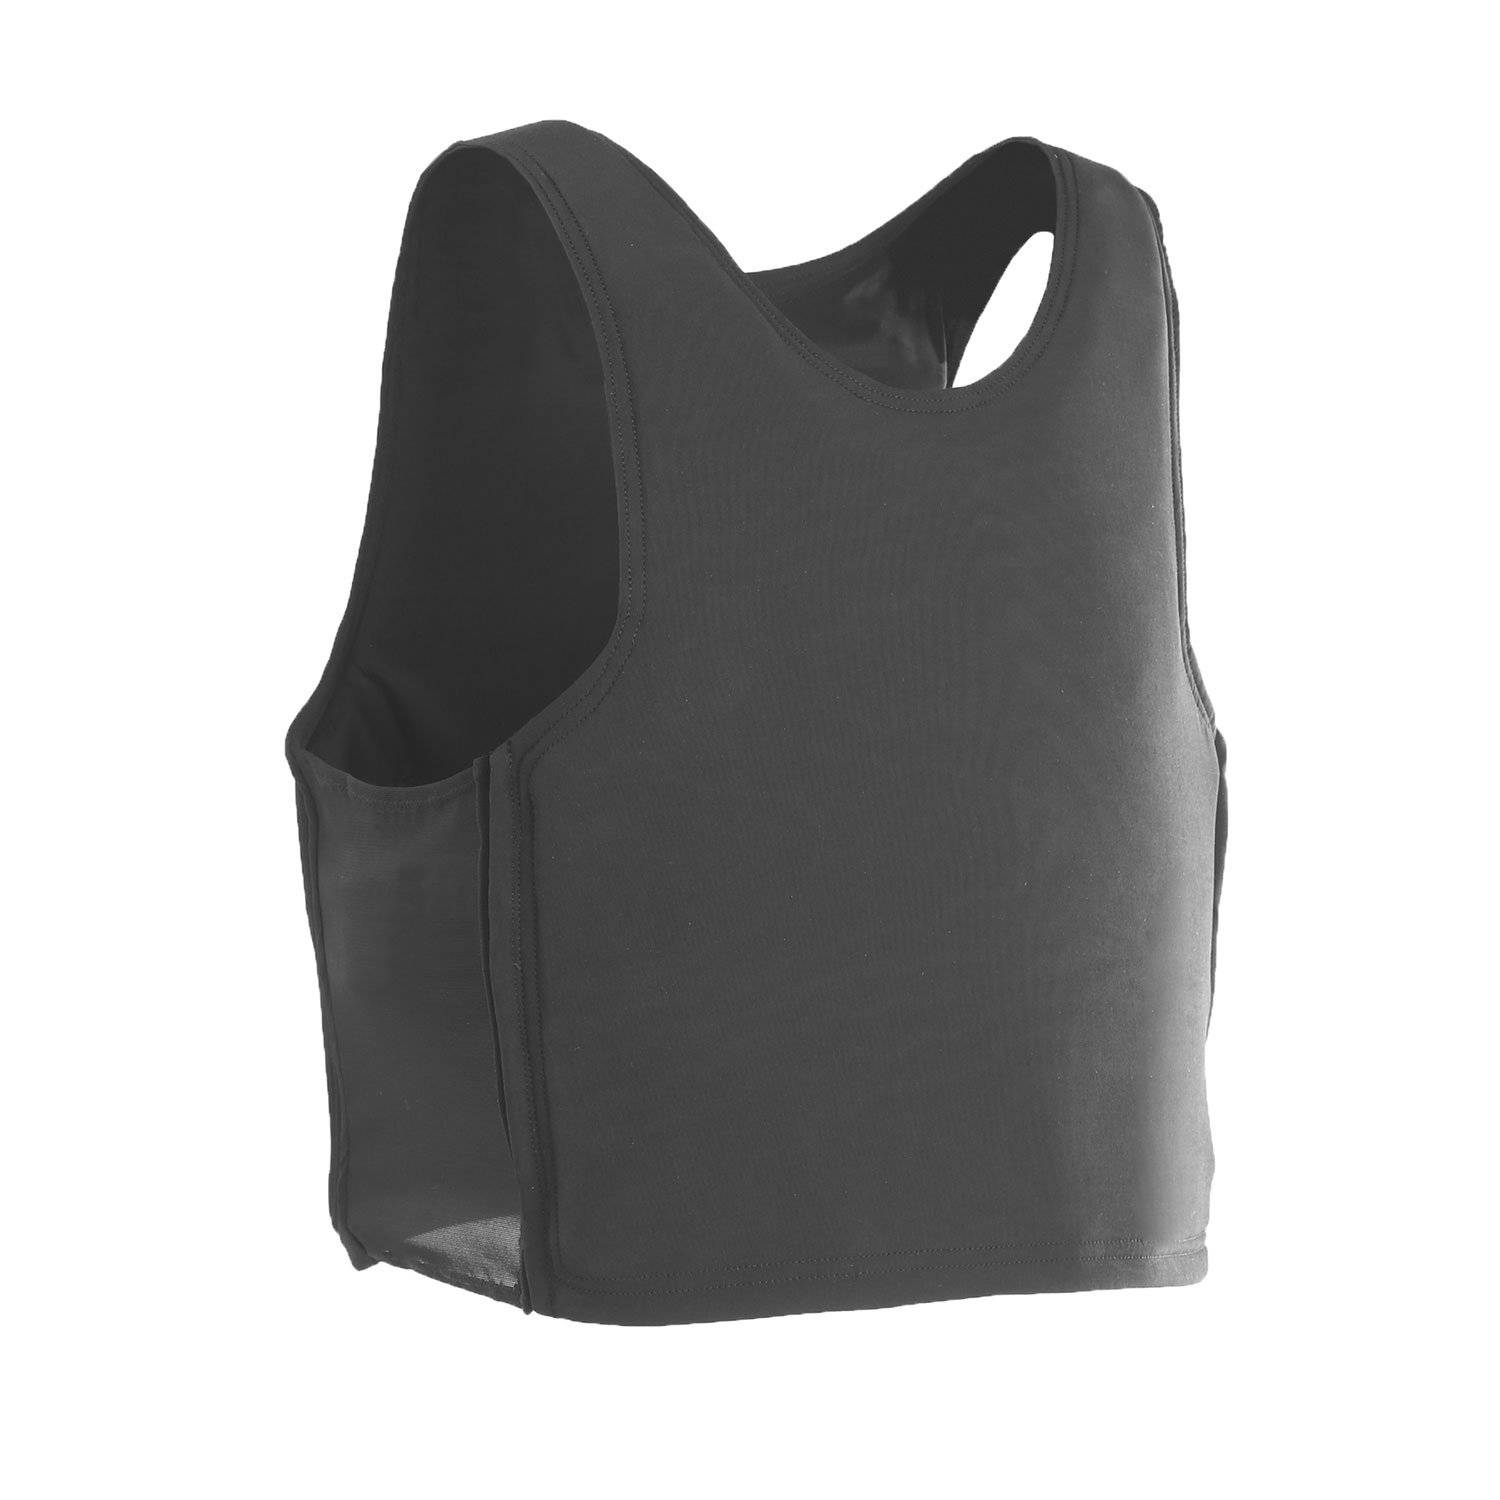 Point Blank Executive Body Armor and Carrier Level AXII